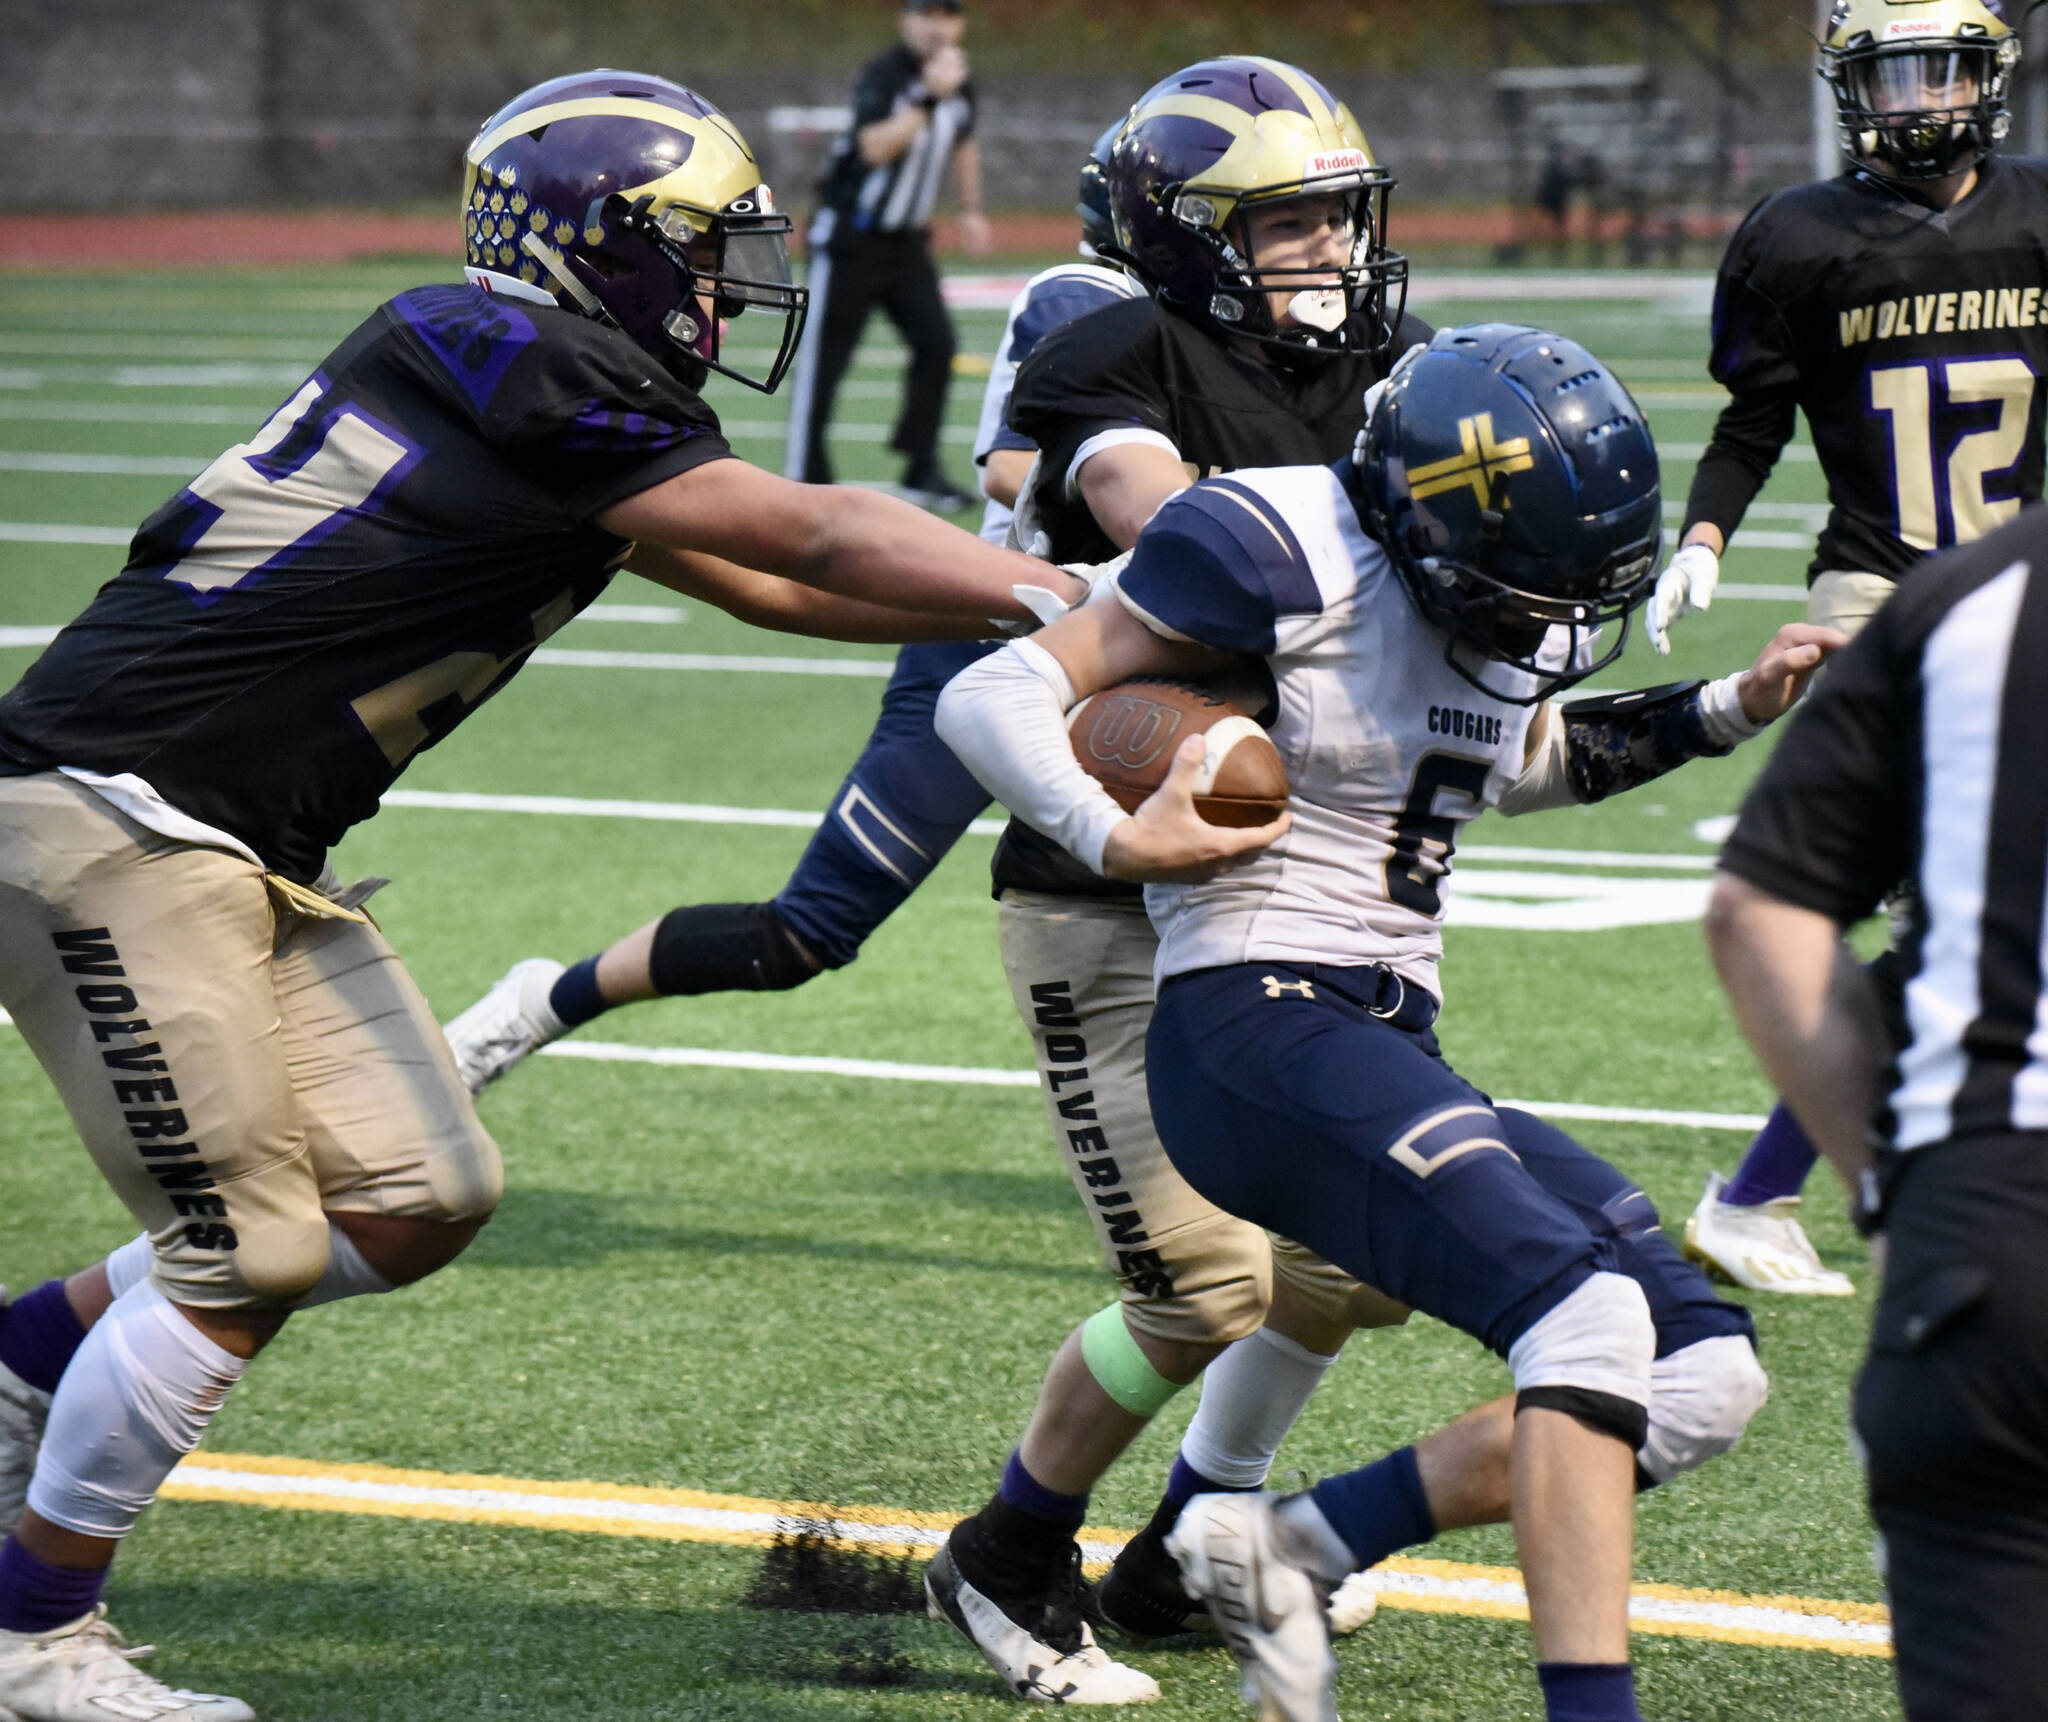 Wolverine’s Chris Gustafson, #24, and Whiley McCutcheon, #34, stop the Cougars’ running back. (John Stimpson photo)